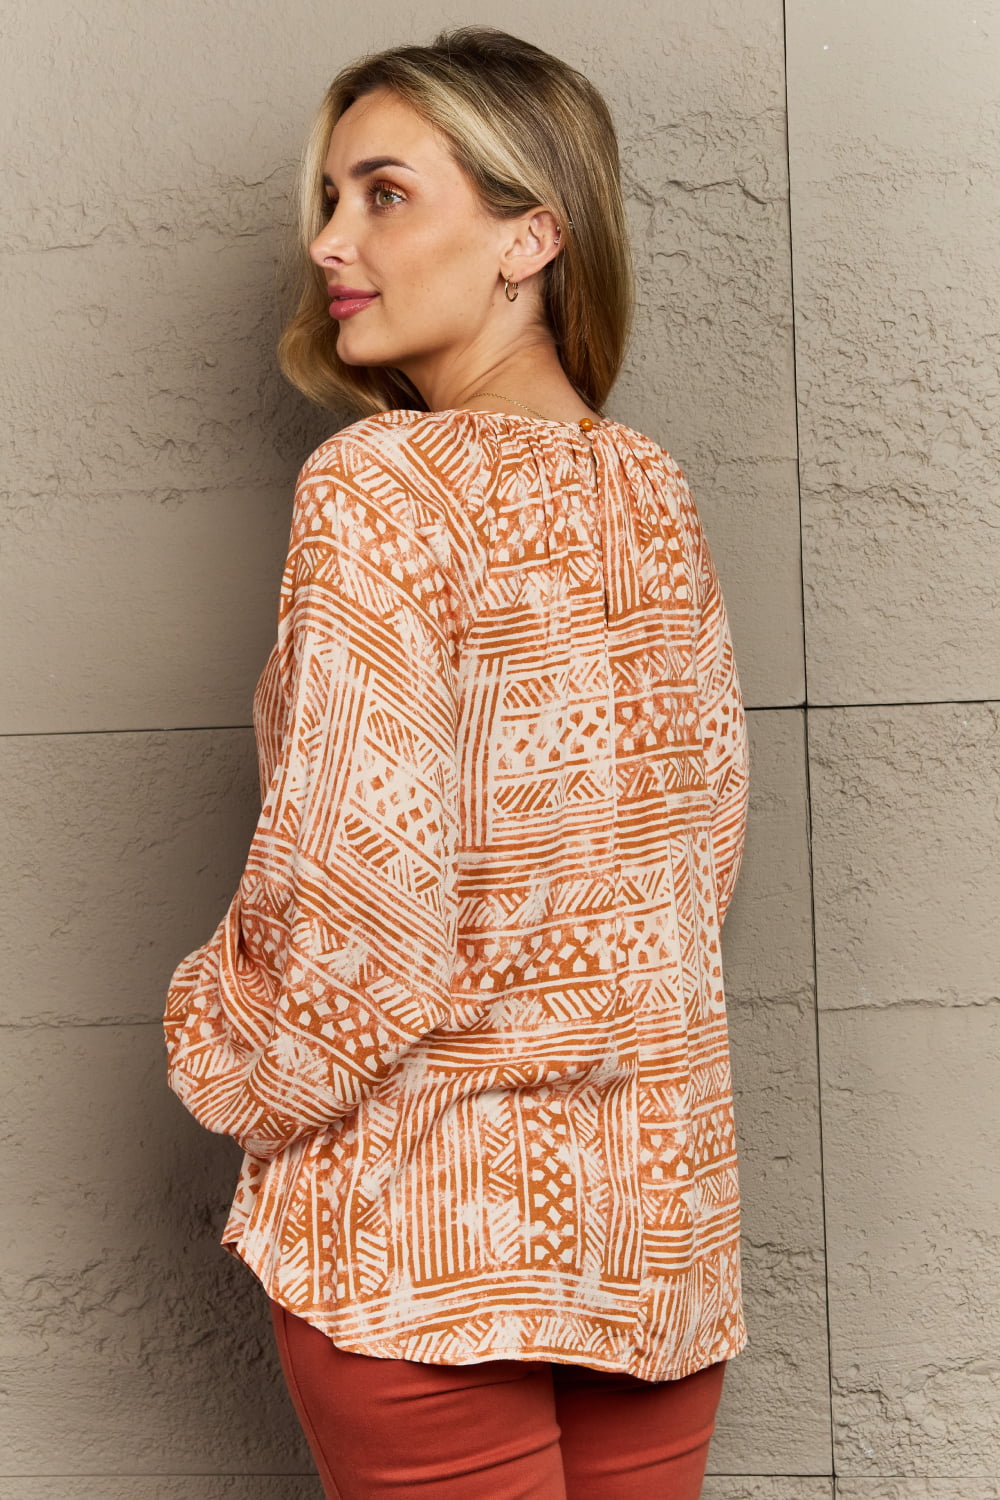 Just For You Aztec Tunic Top